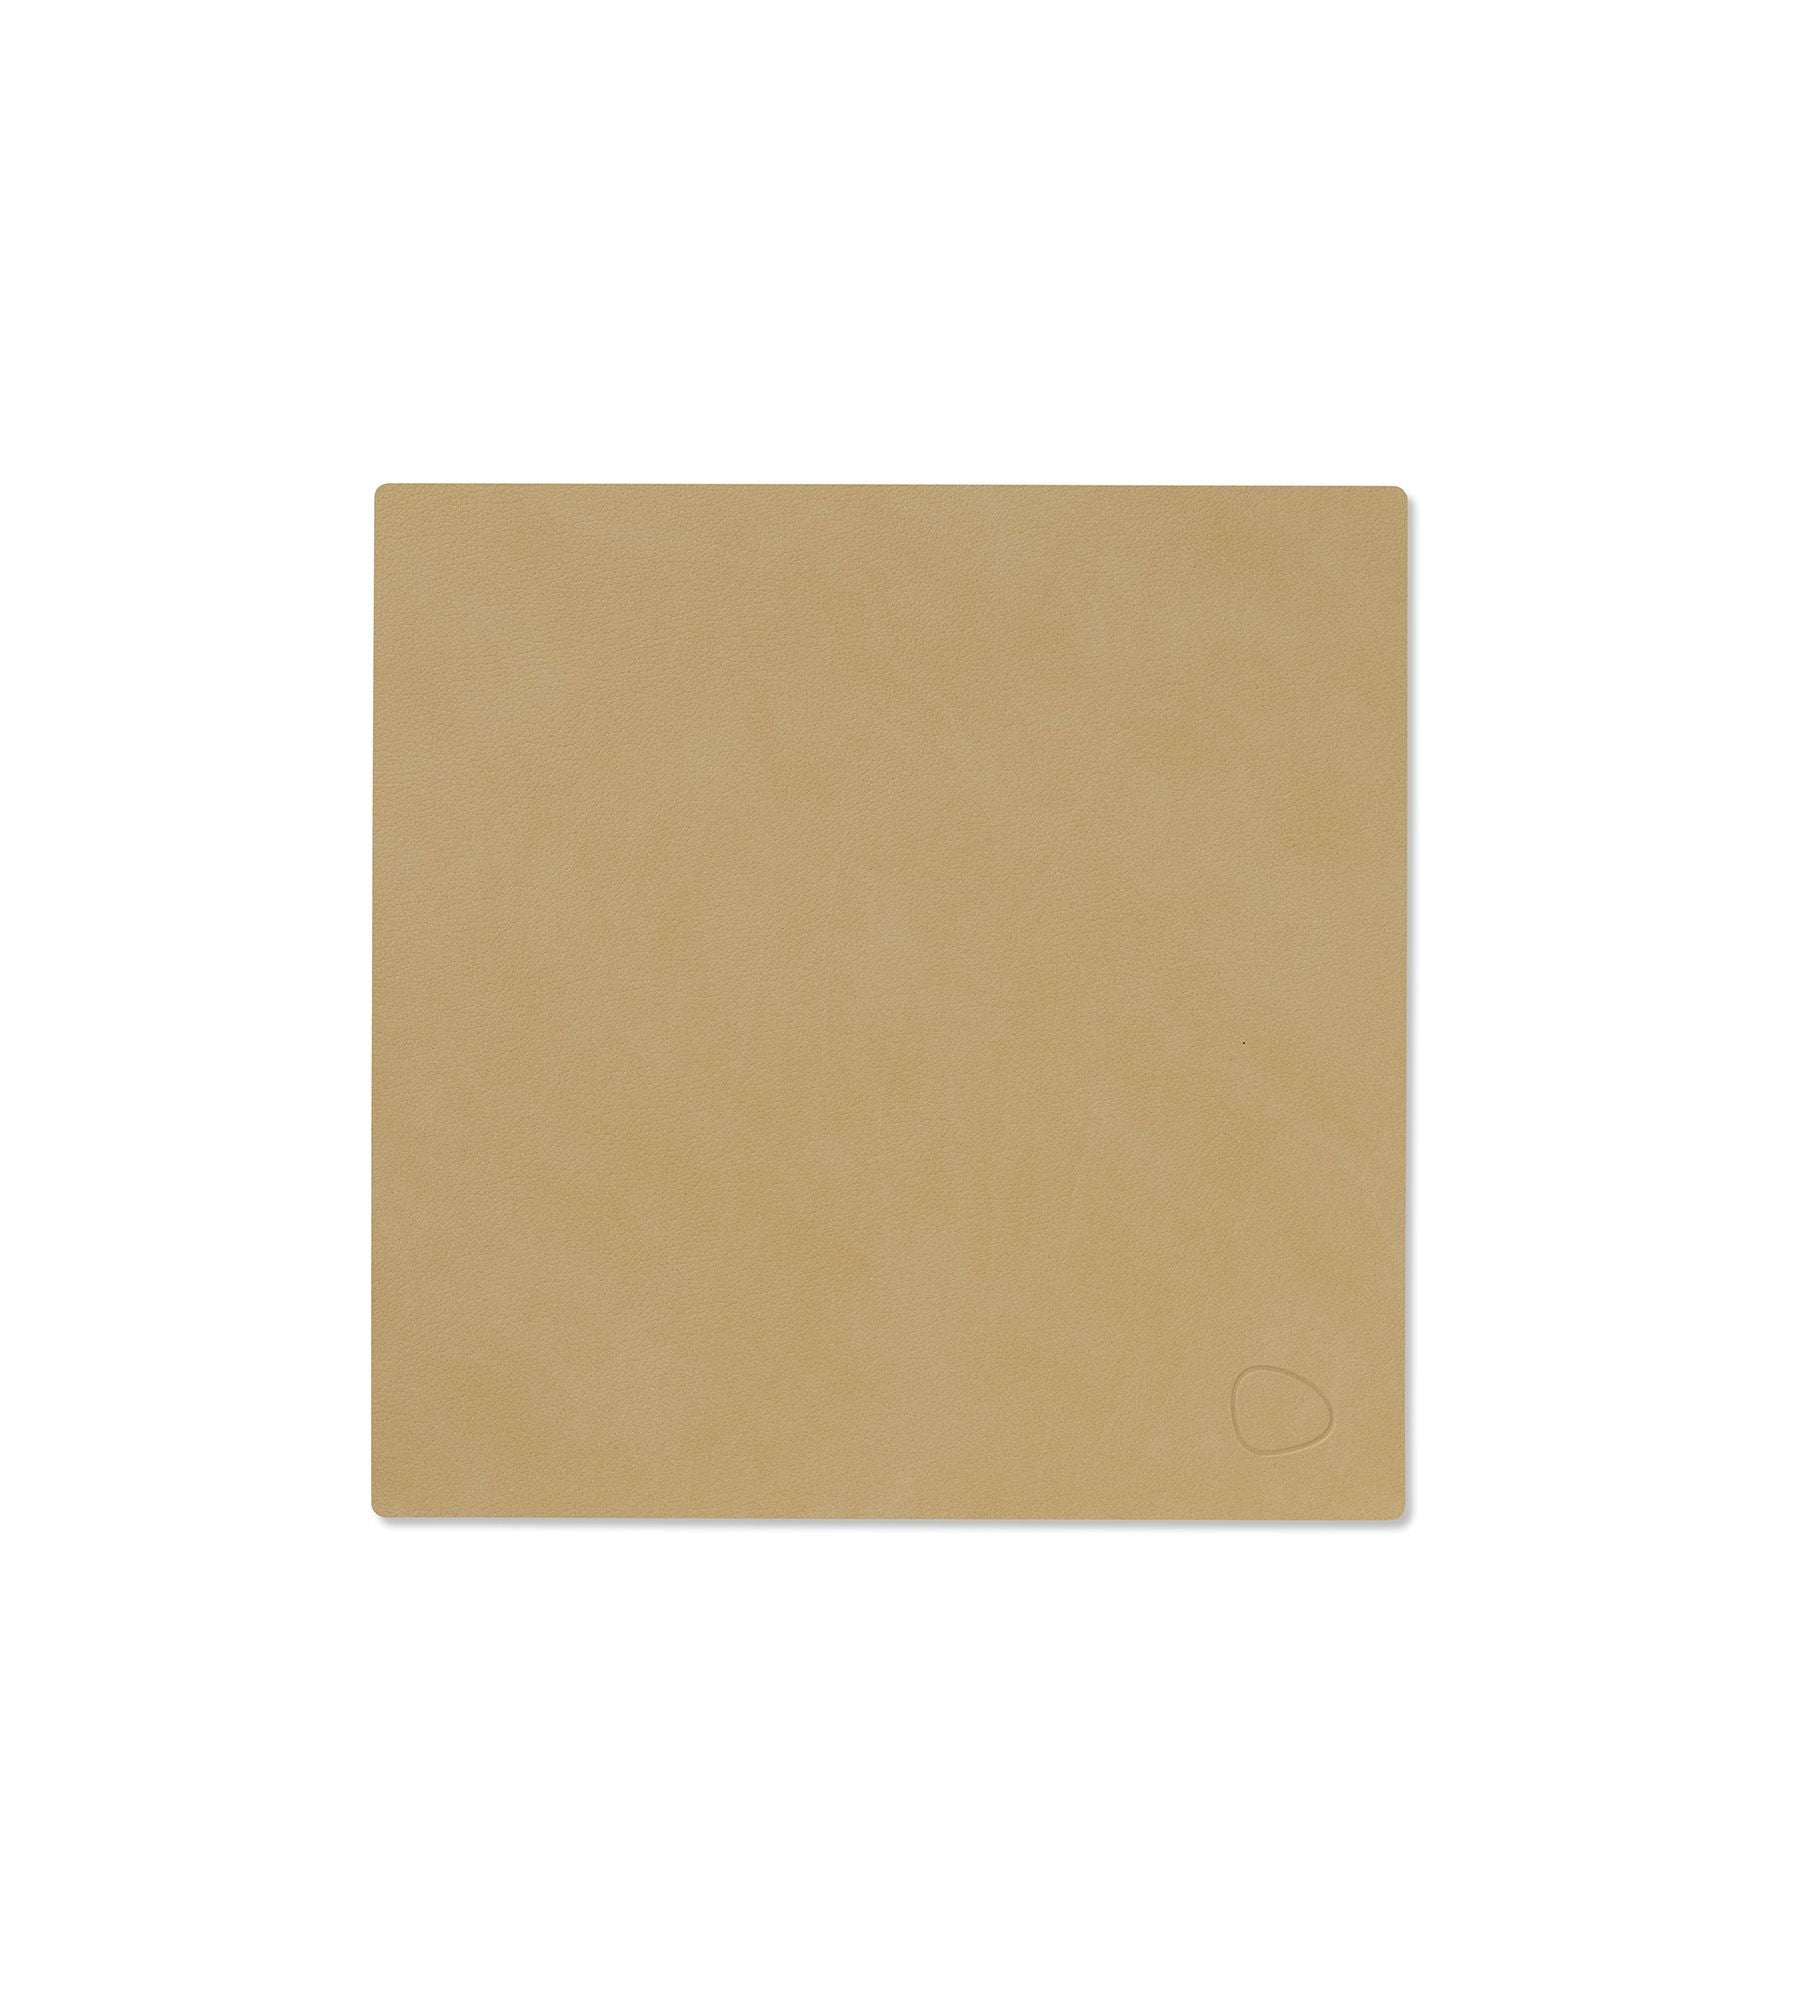 Lind Dna Table Mat Square Small, Khaki